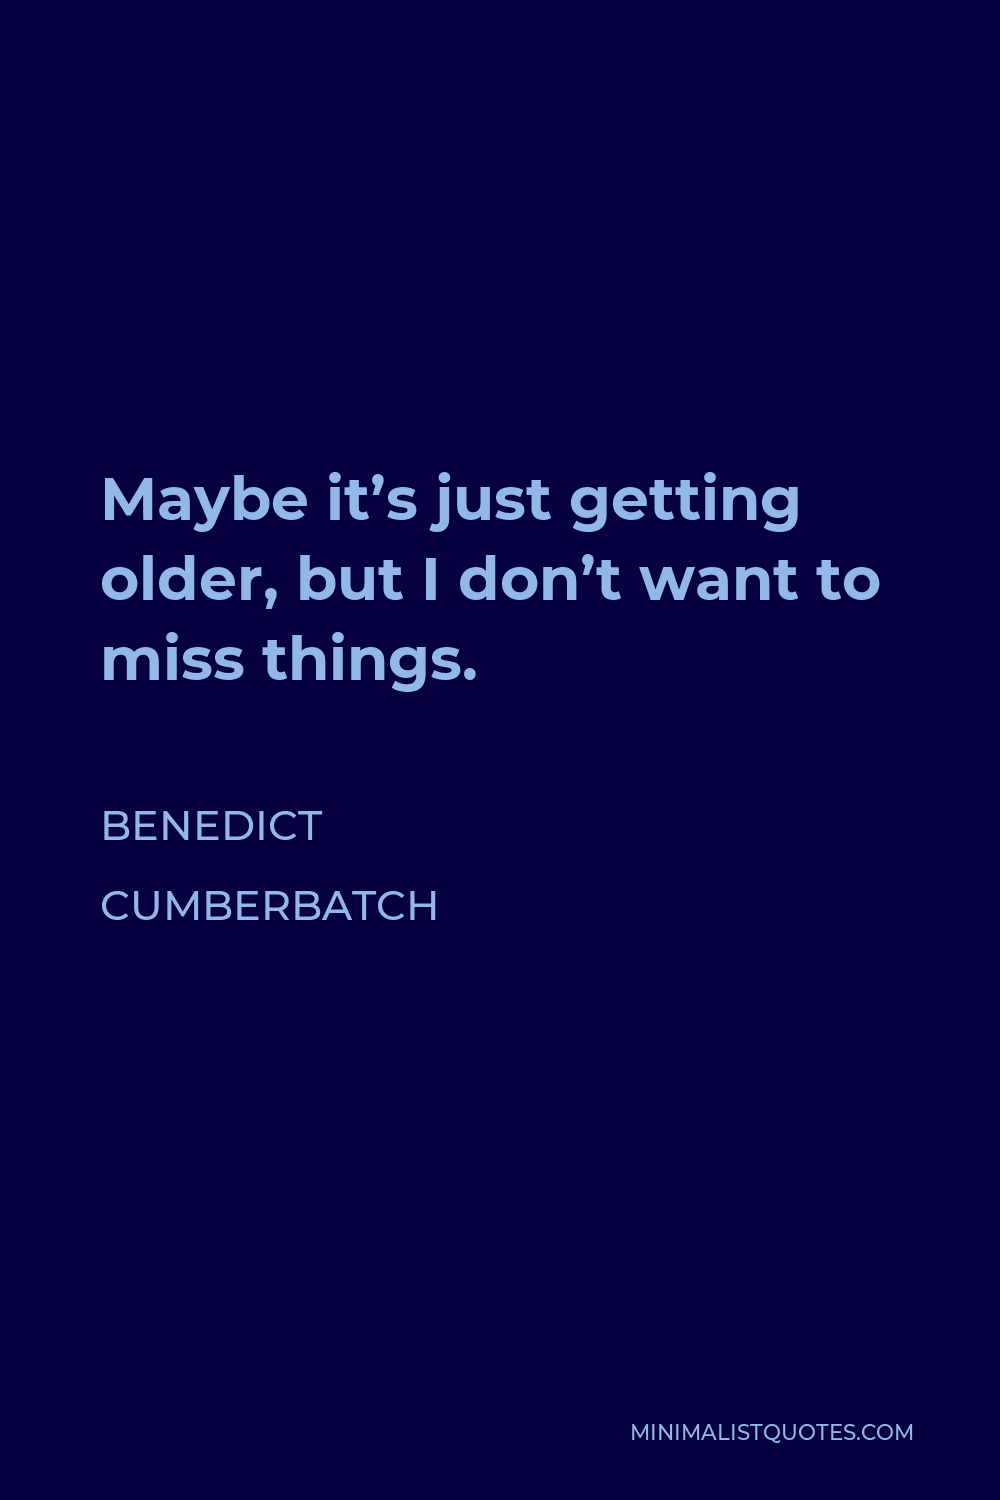 Benedict Cumberbatch Quote - Maybe it’s just getting older, but I don’t want to miss things.